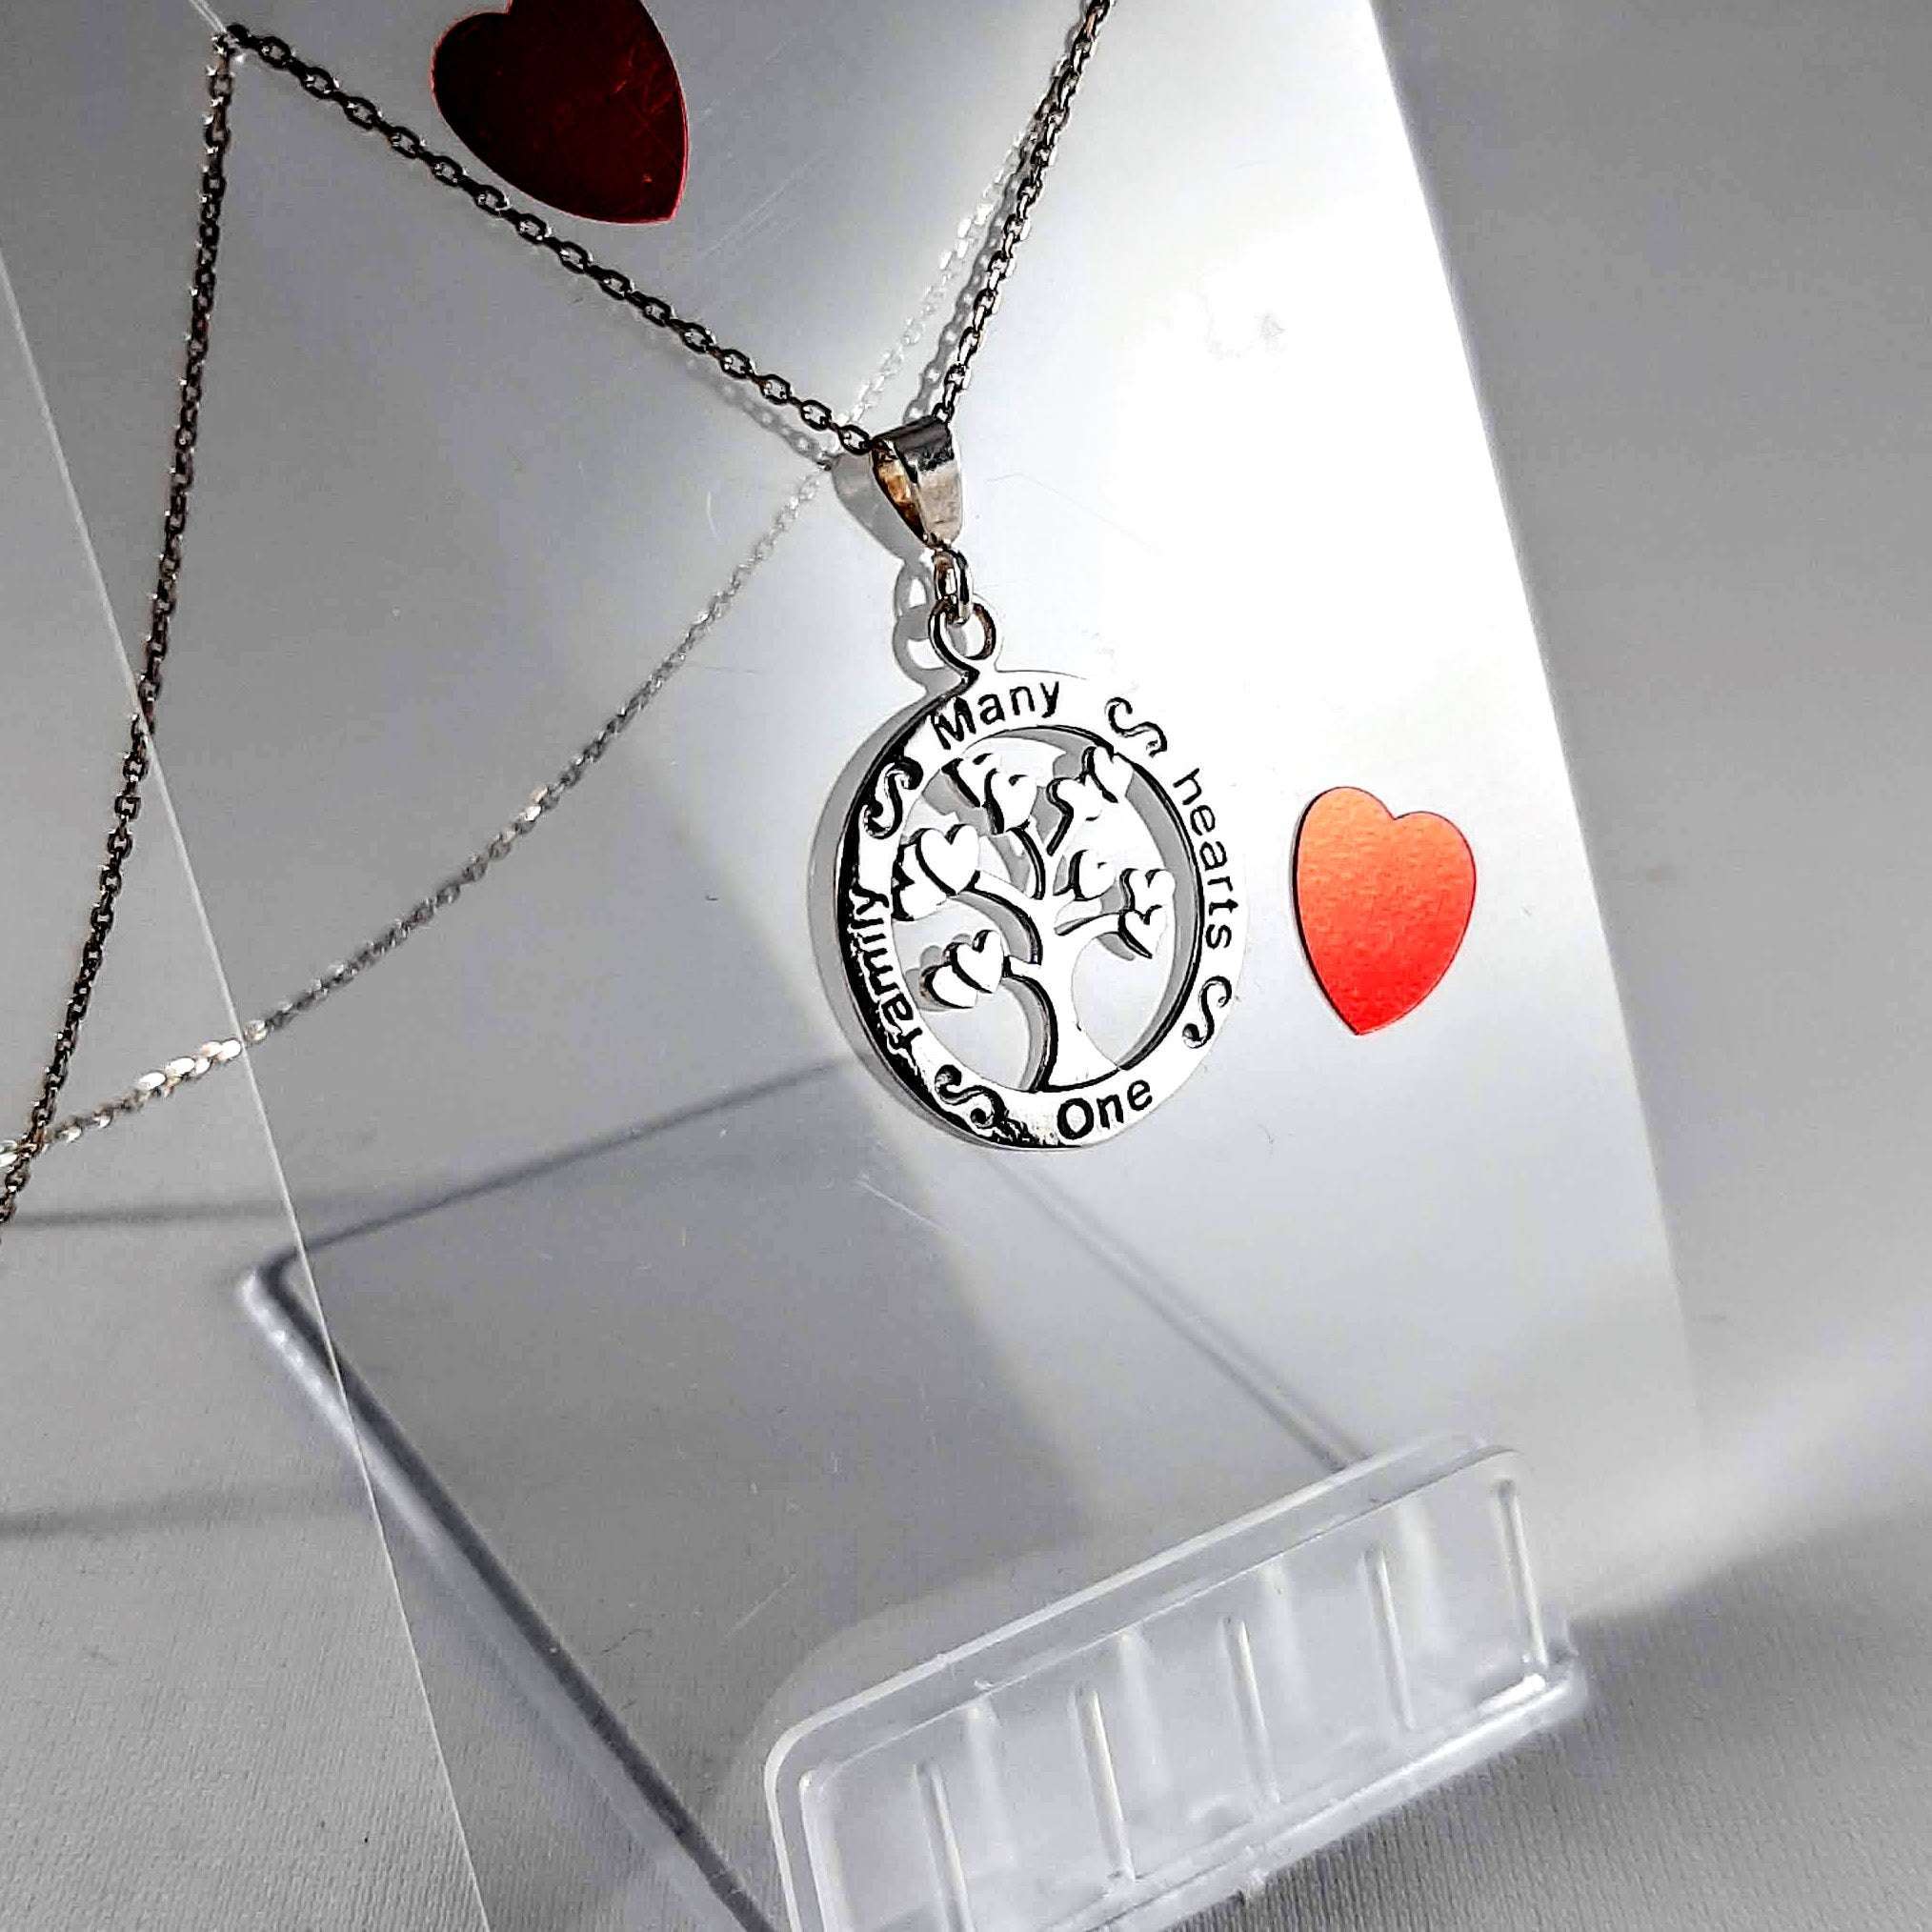 Have a Heart Sterling Silver Tree of Hearts Pendant